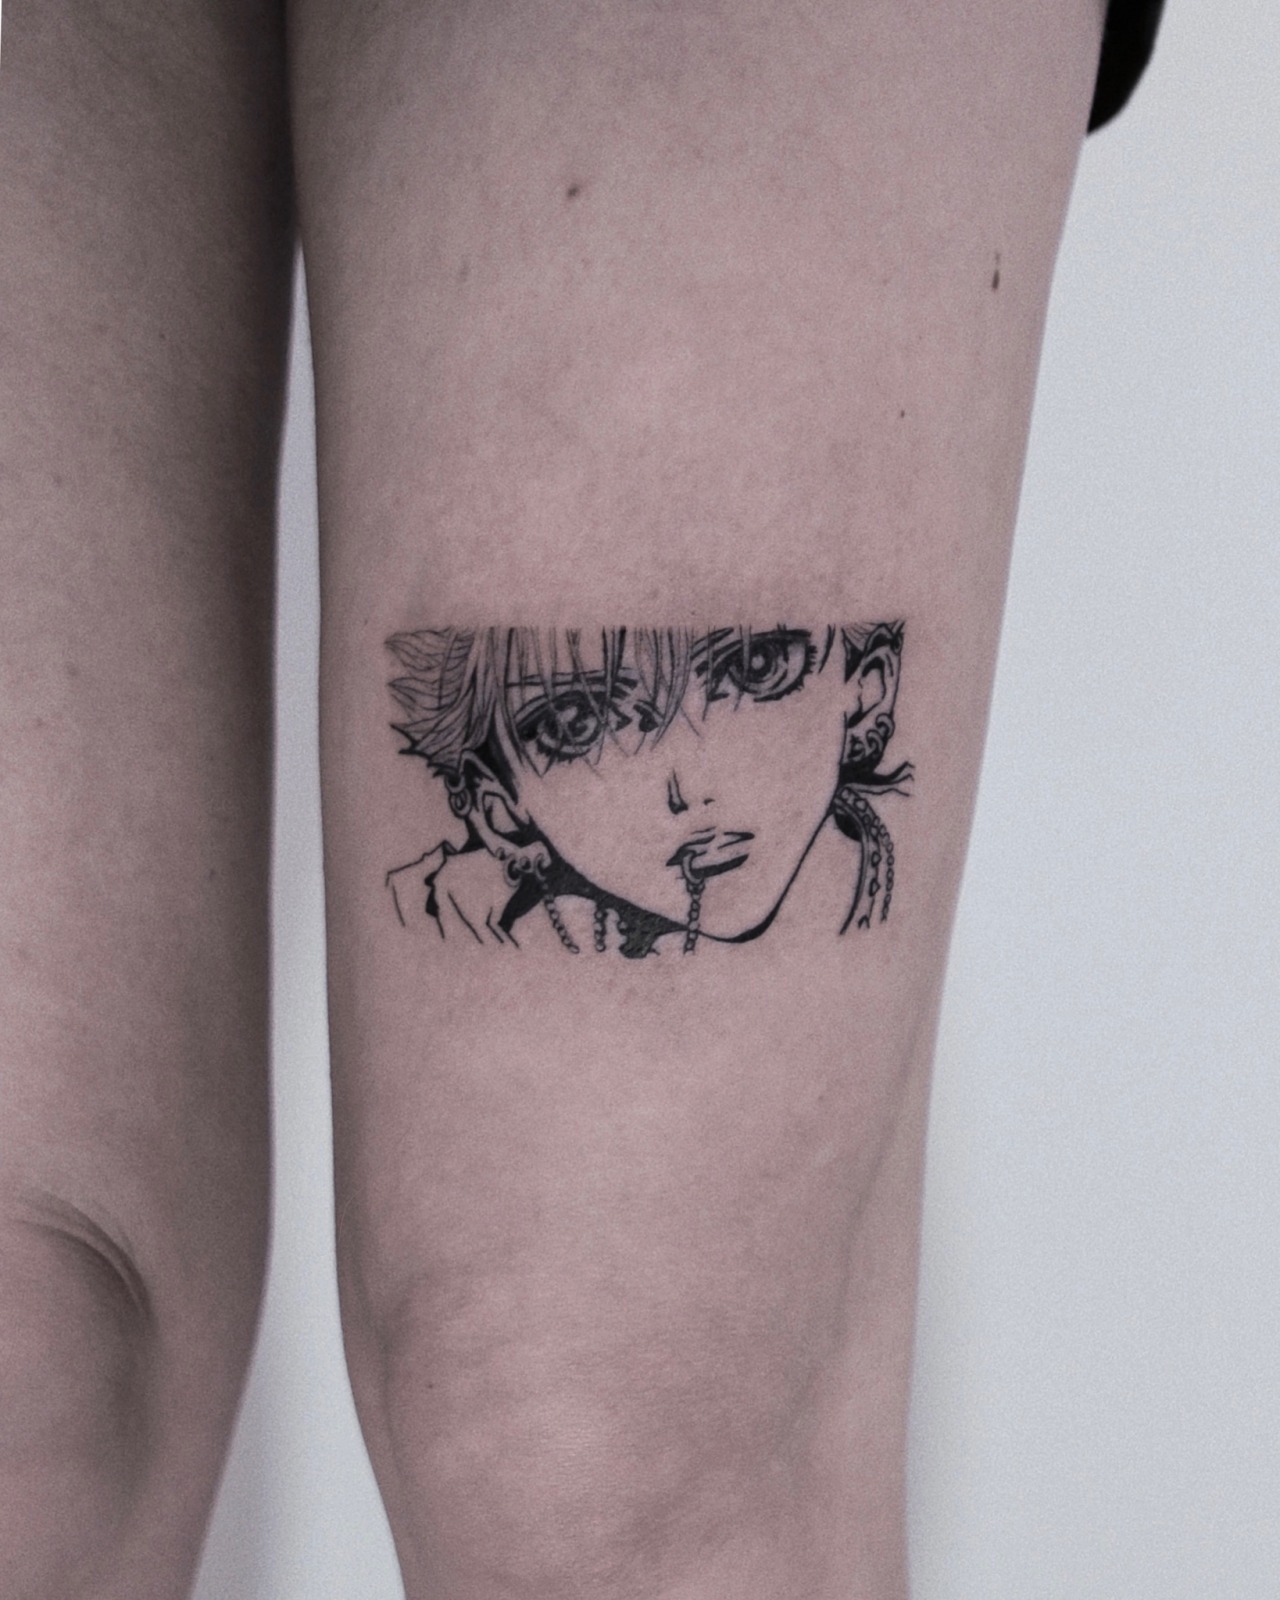 1ANIME TATTOO PAGE on Instagram nana tattoos done by abigaild1219 To  submit your work use the tag animemasterink And dont forget to share our  page